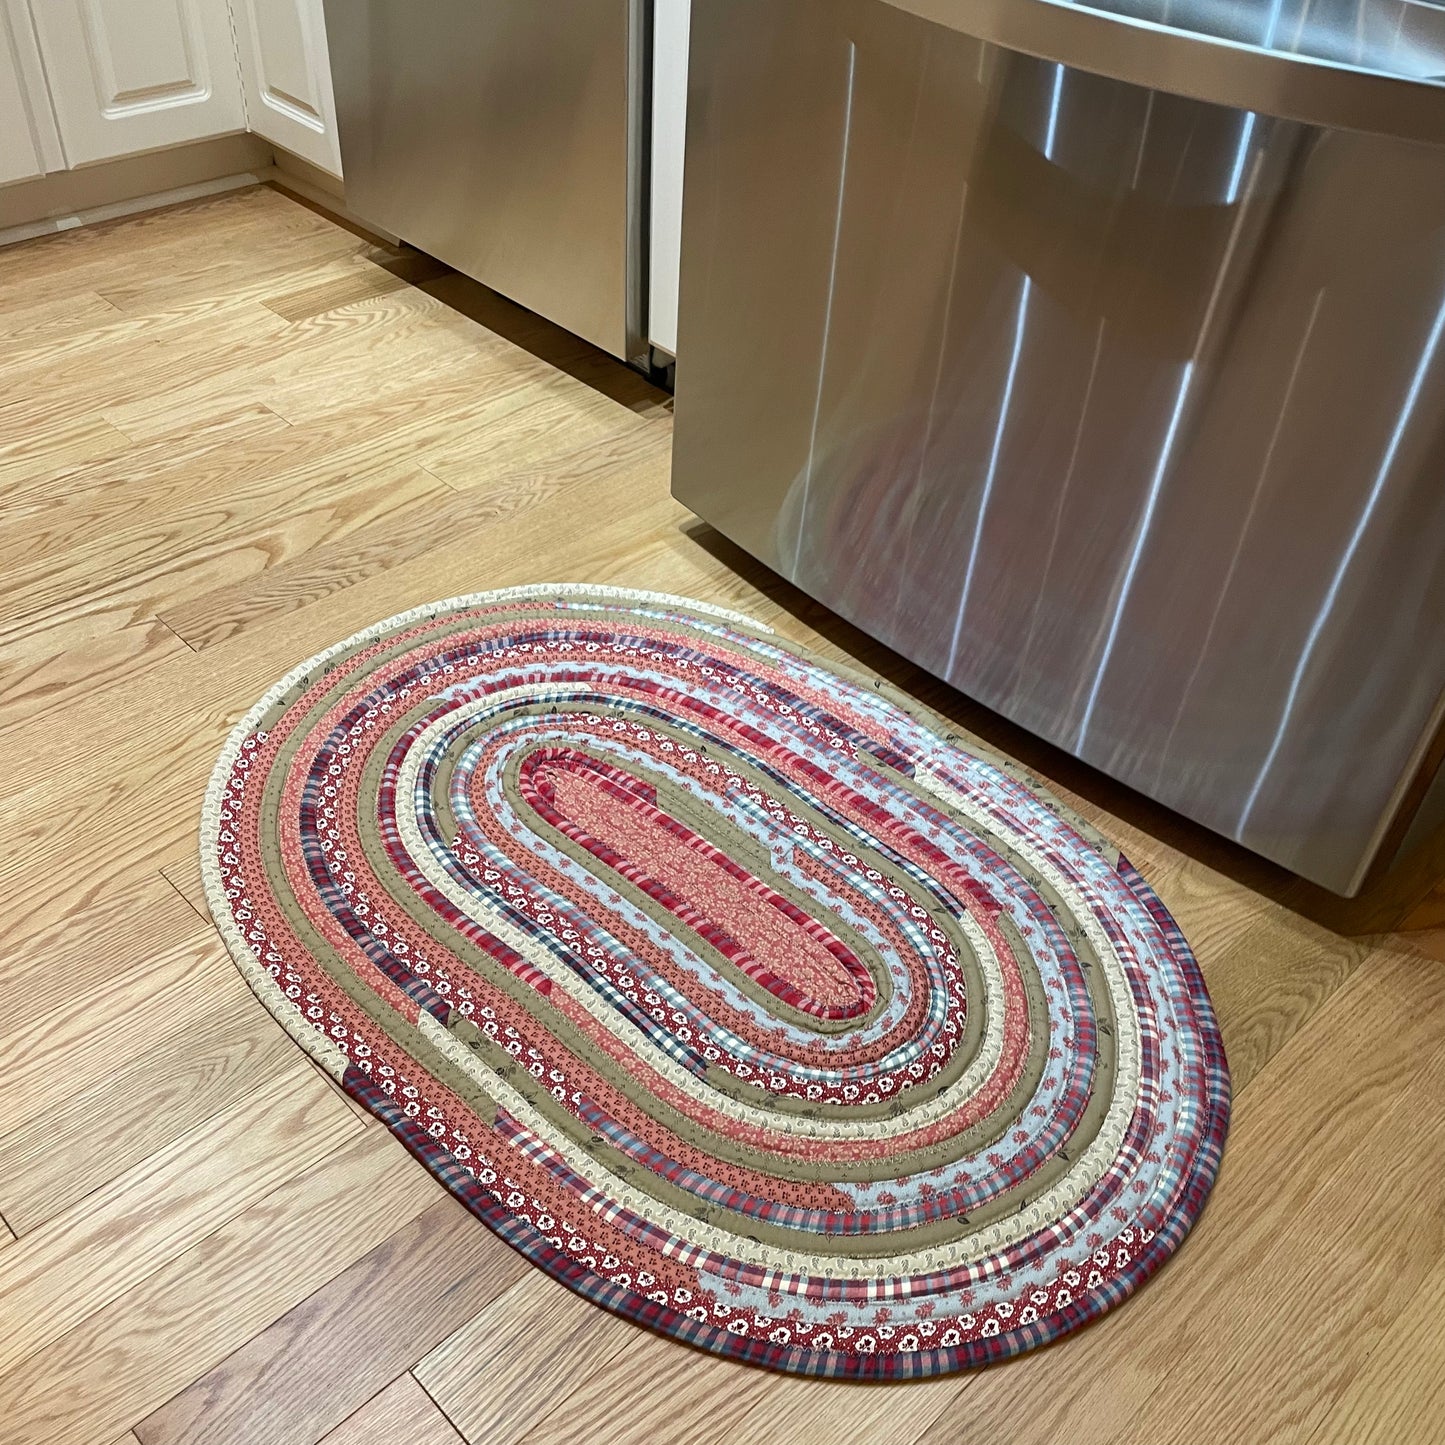 Cute Farmhouse Kitchen Sink Rug Washable Cotton Rug For Decorating